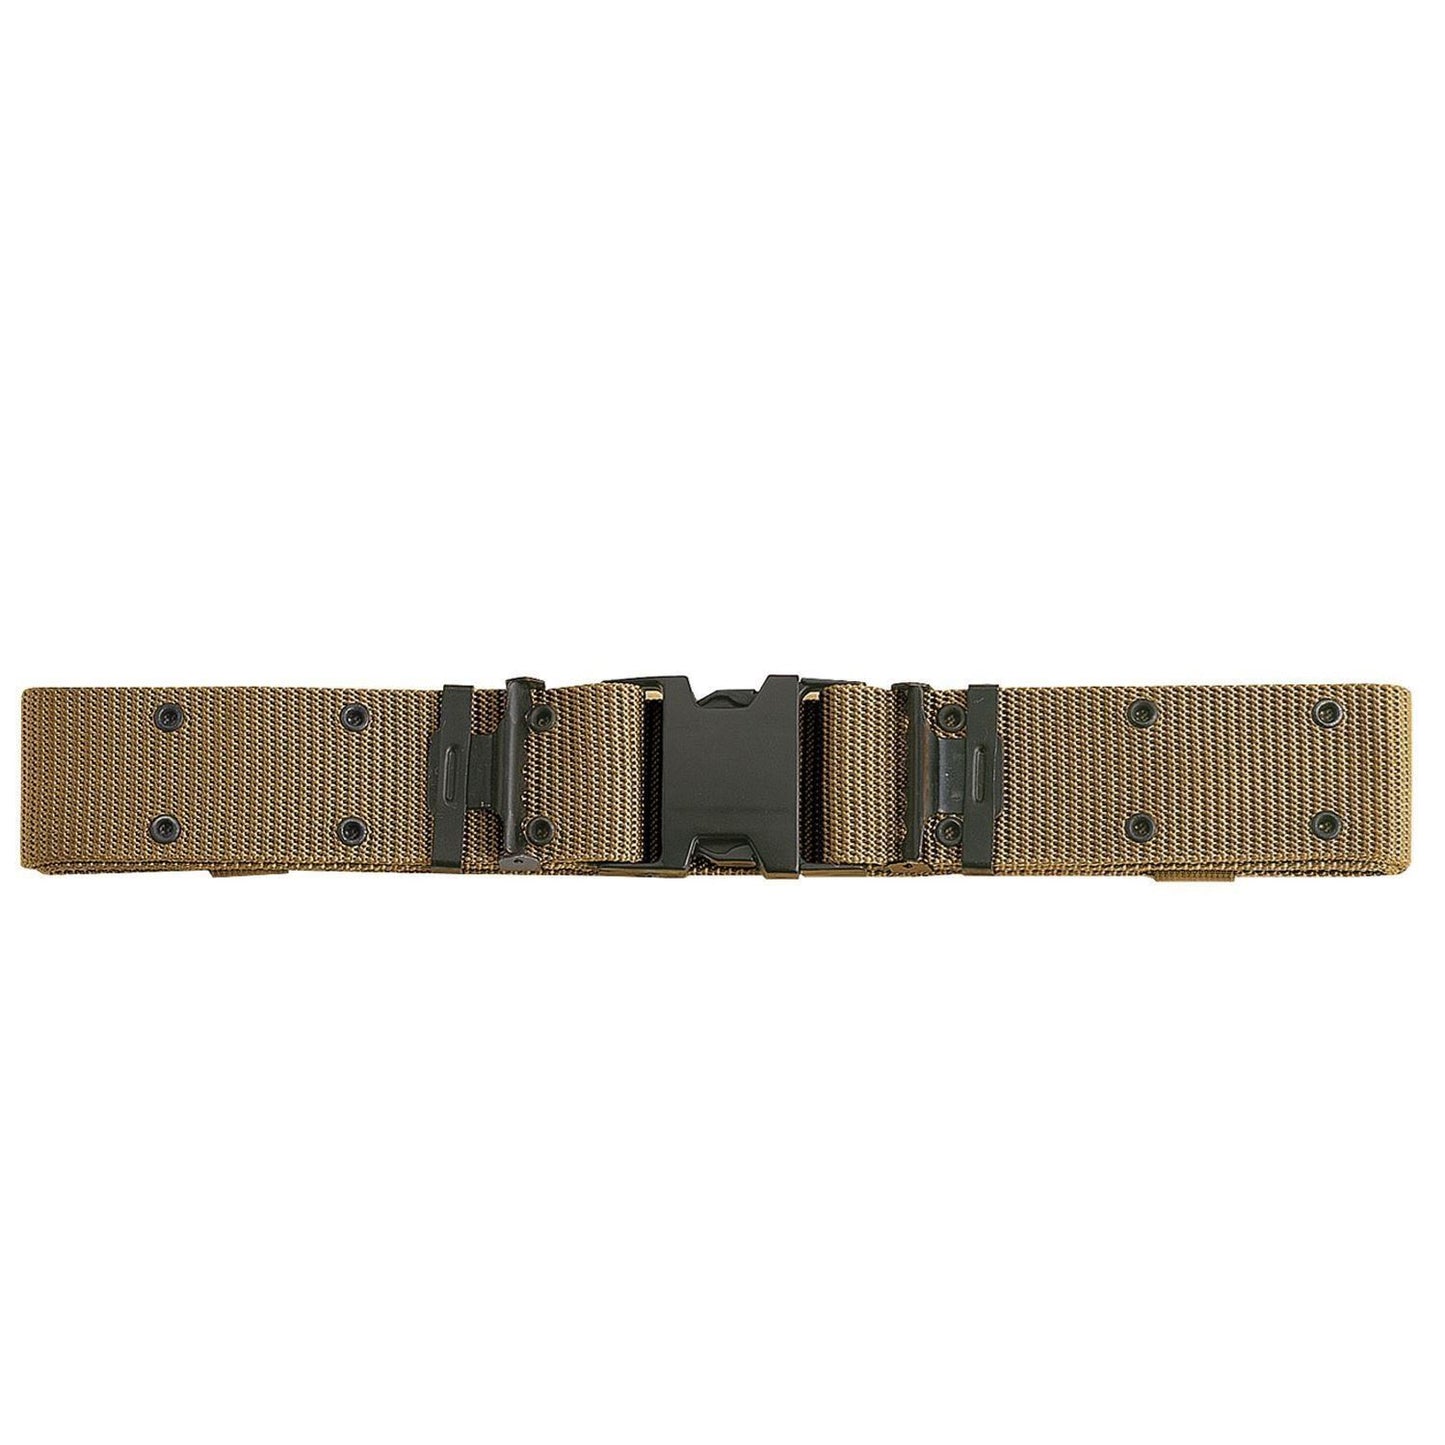 New Issue Marine Corps Style Quick Release Pistol Belts - Coyote Brown / Large ( 5 per pack)